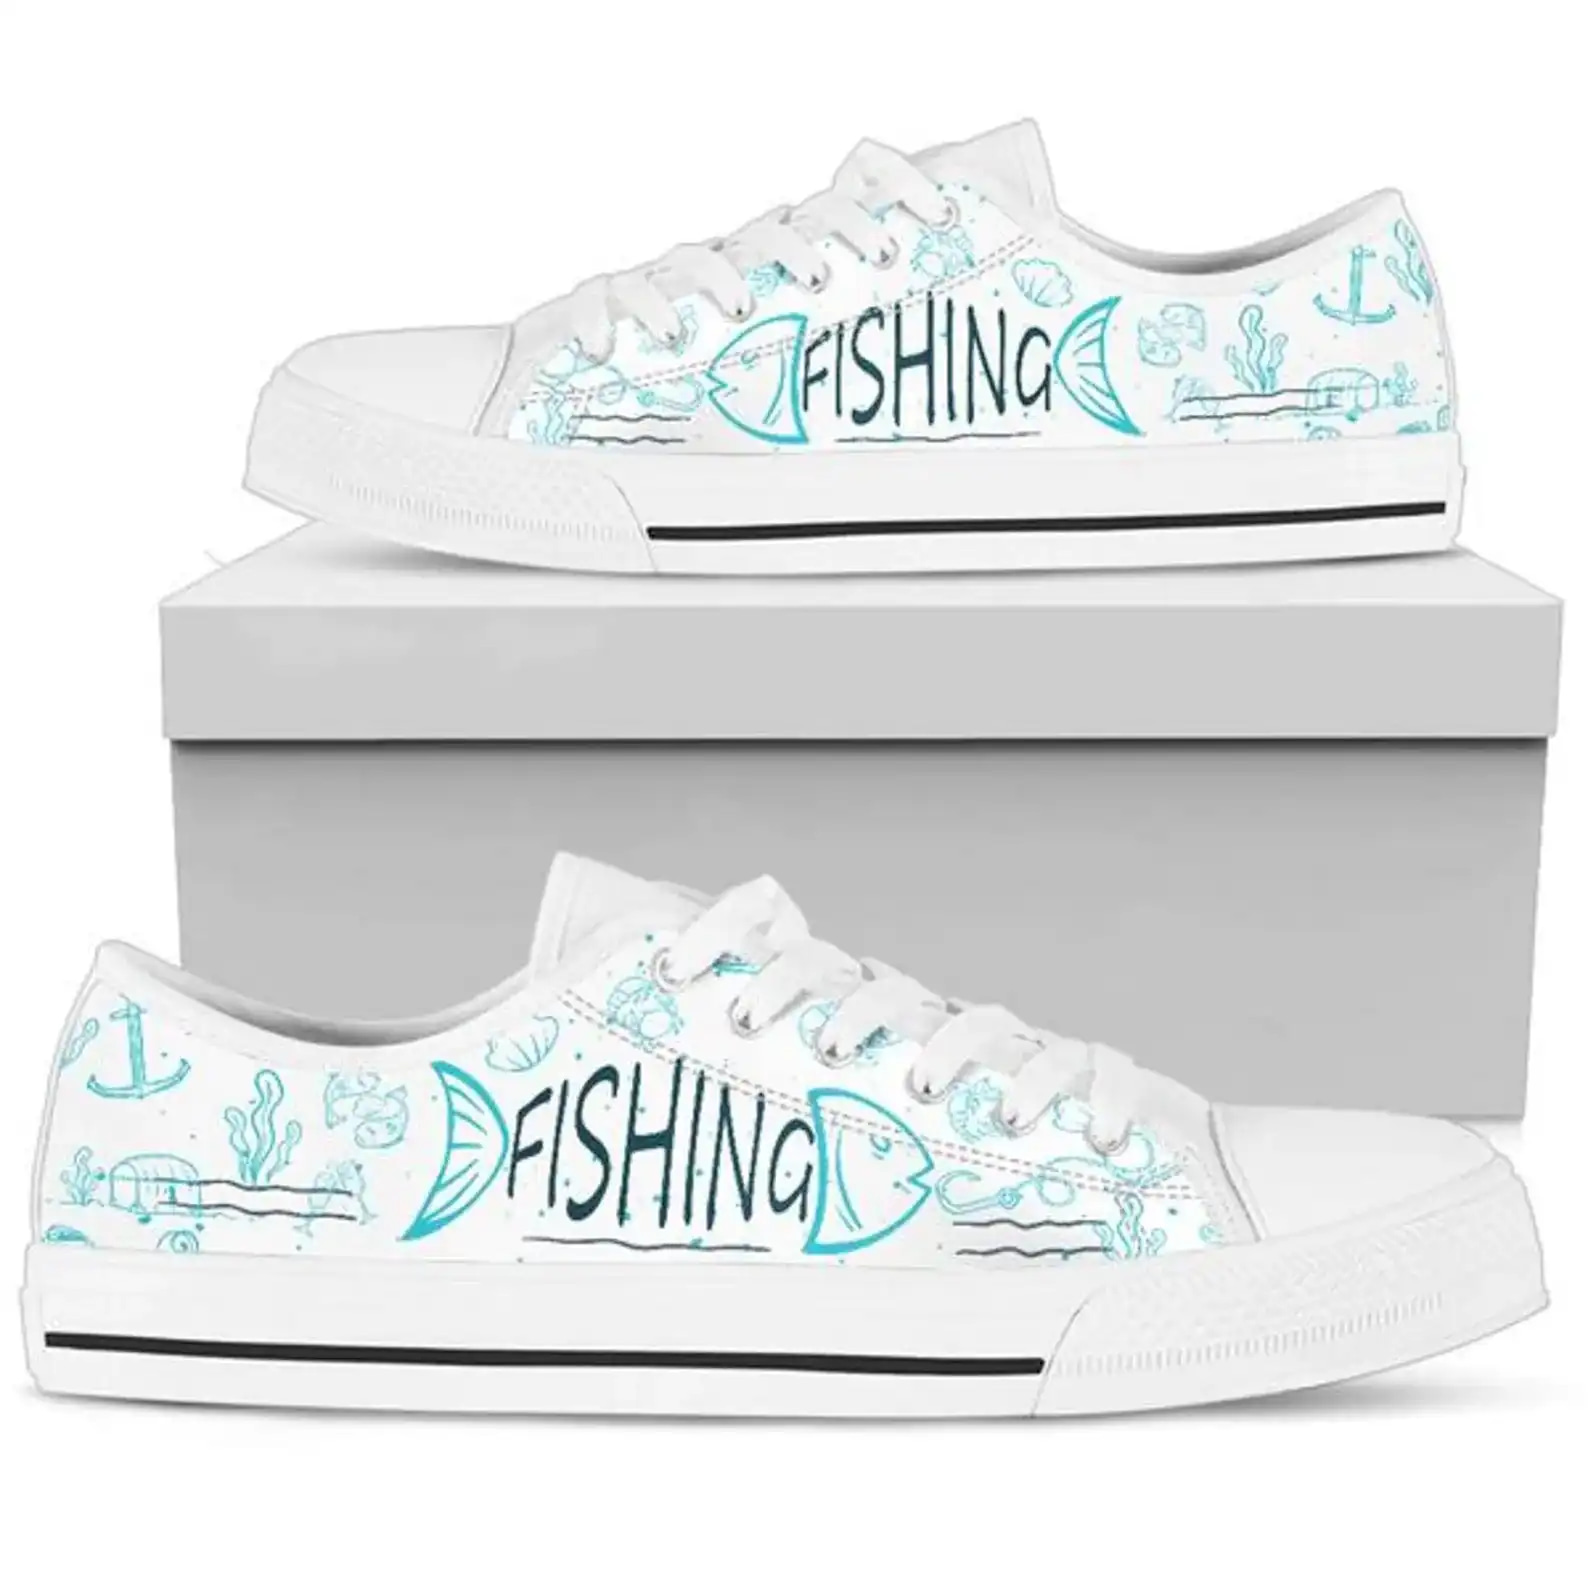 Under Sea Fishing Blue Detail Aquatic Plants And Animals Low Top Sneakers